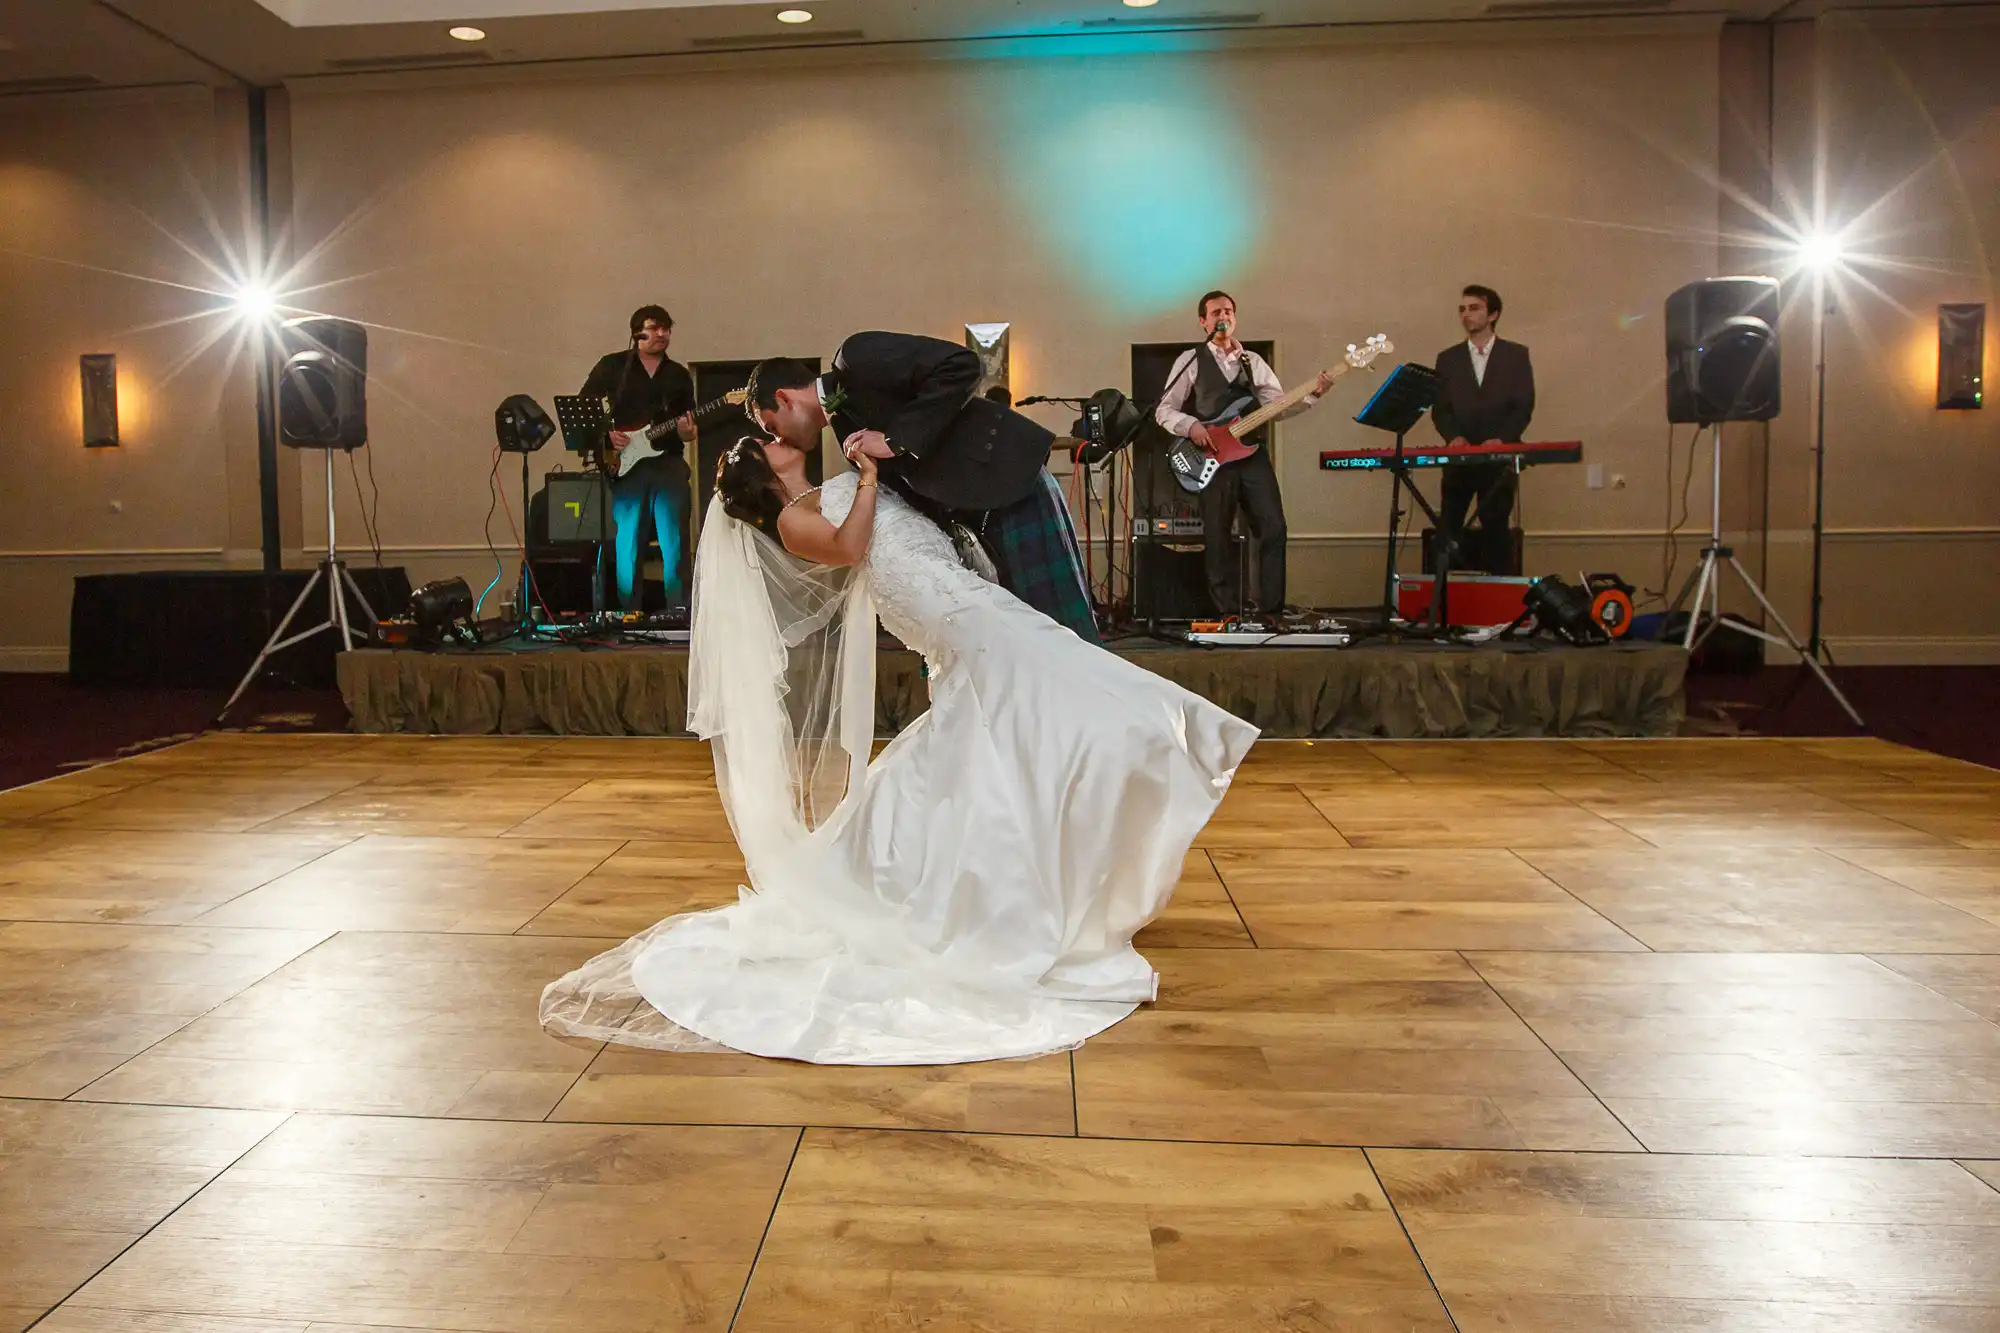 Bride and groom sharing a kiss on the dance floor while a band performs in the background at a wedding reception.